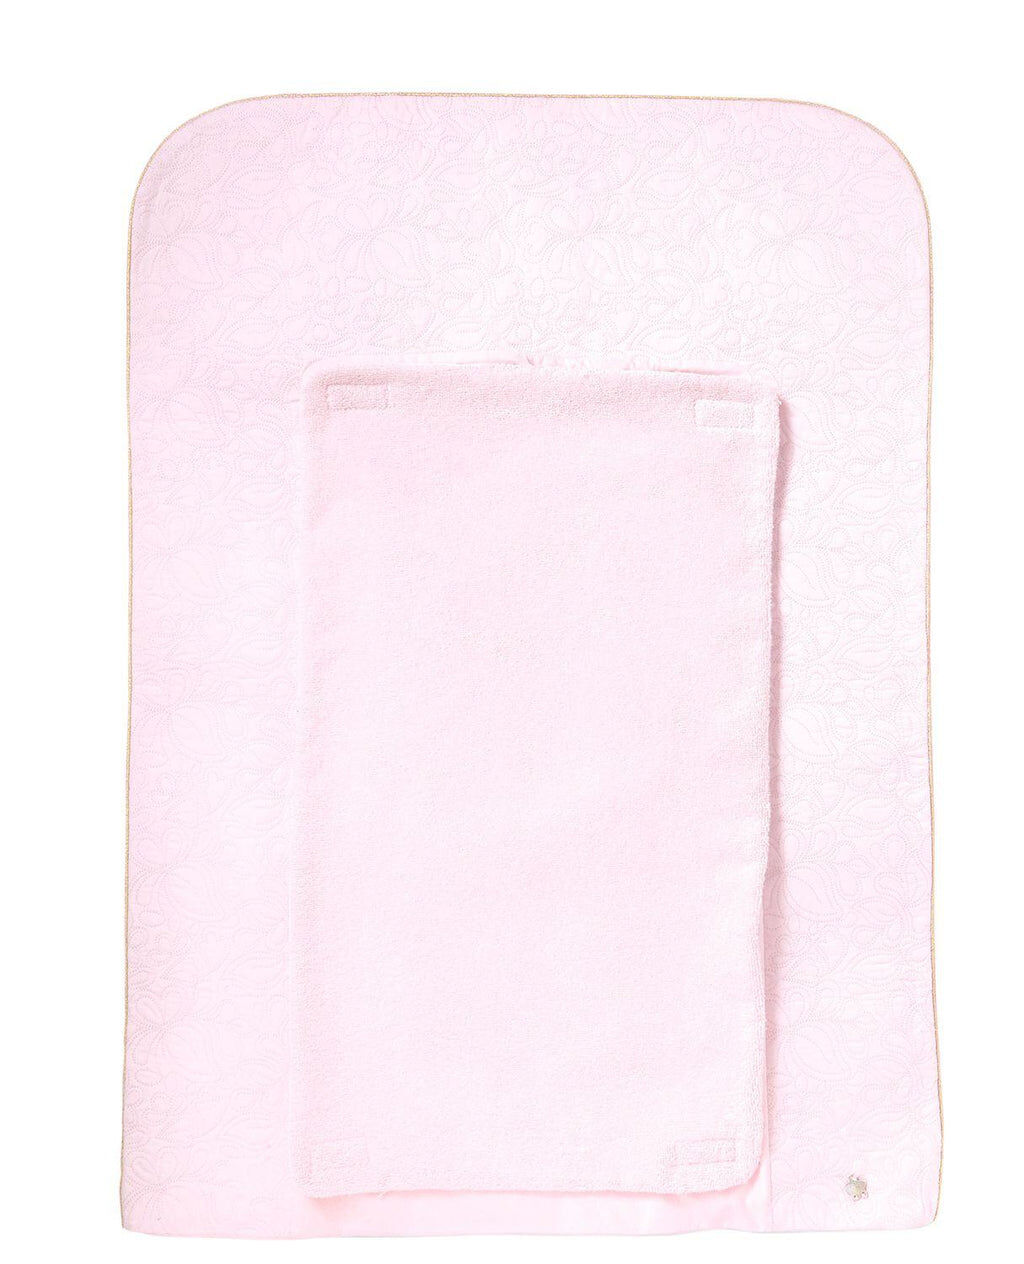 Changing mat cover changing table - Delicacy Pale pink